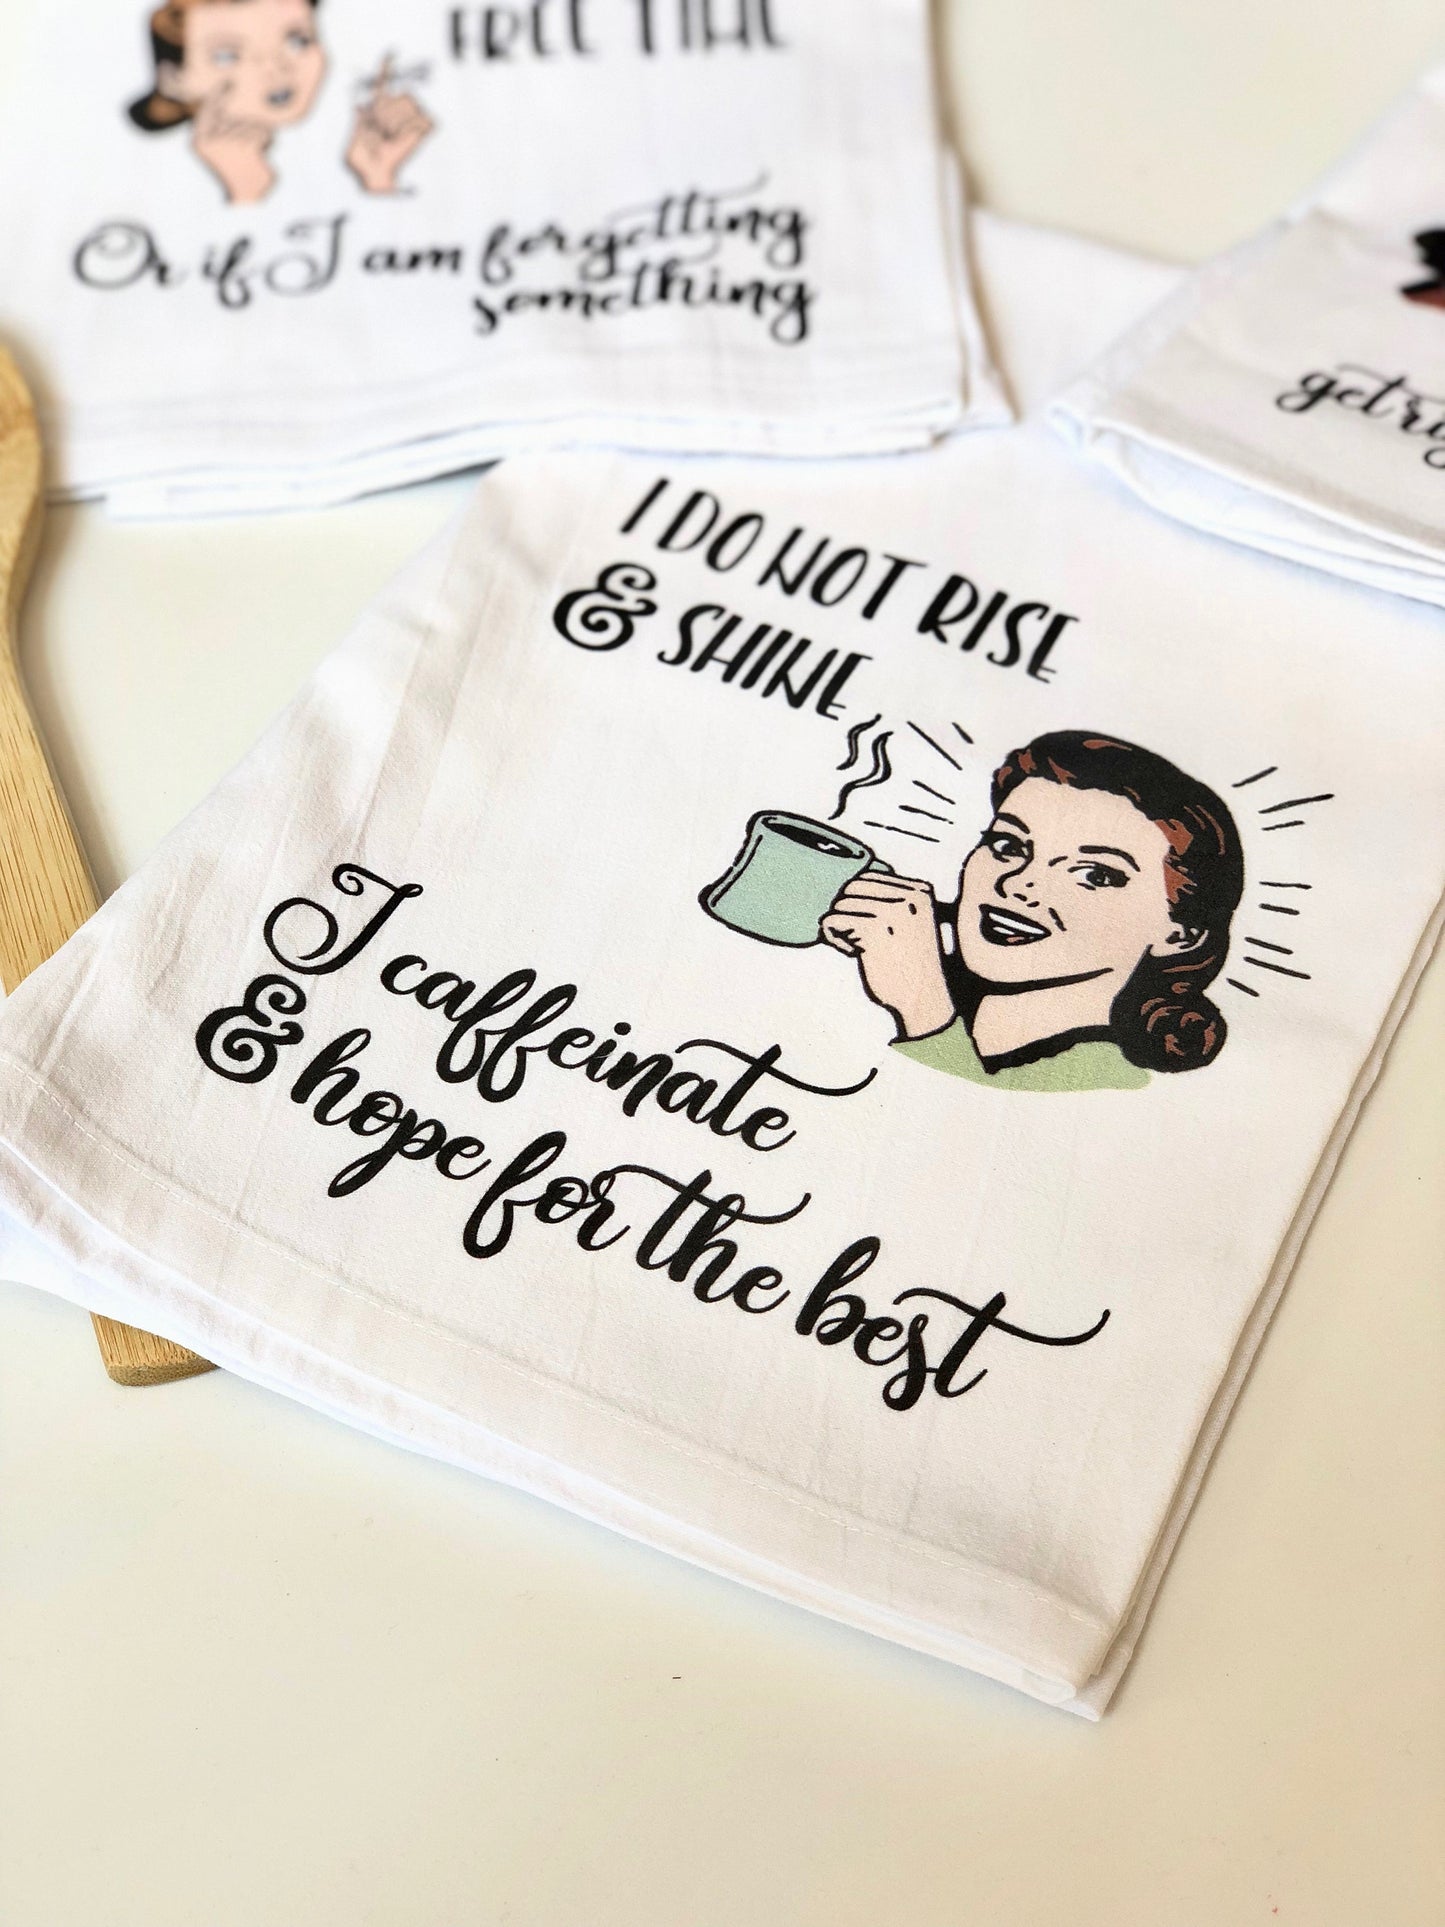 TEACHERS ARE MAGICAL Funny Kitchen Towels with Sayings, Funny Dish Towels,  Flour Sack Towel, Tea towel with Quotes, Decorative Kitchen Towel, gift -  Yahoo Shopping